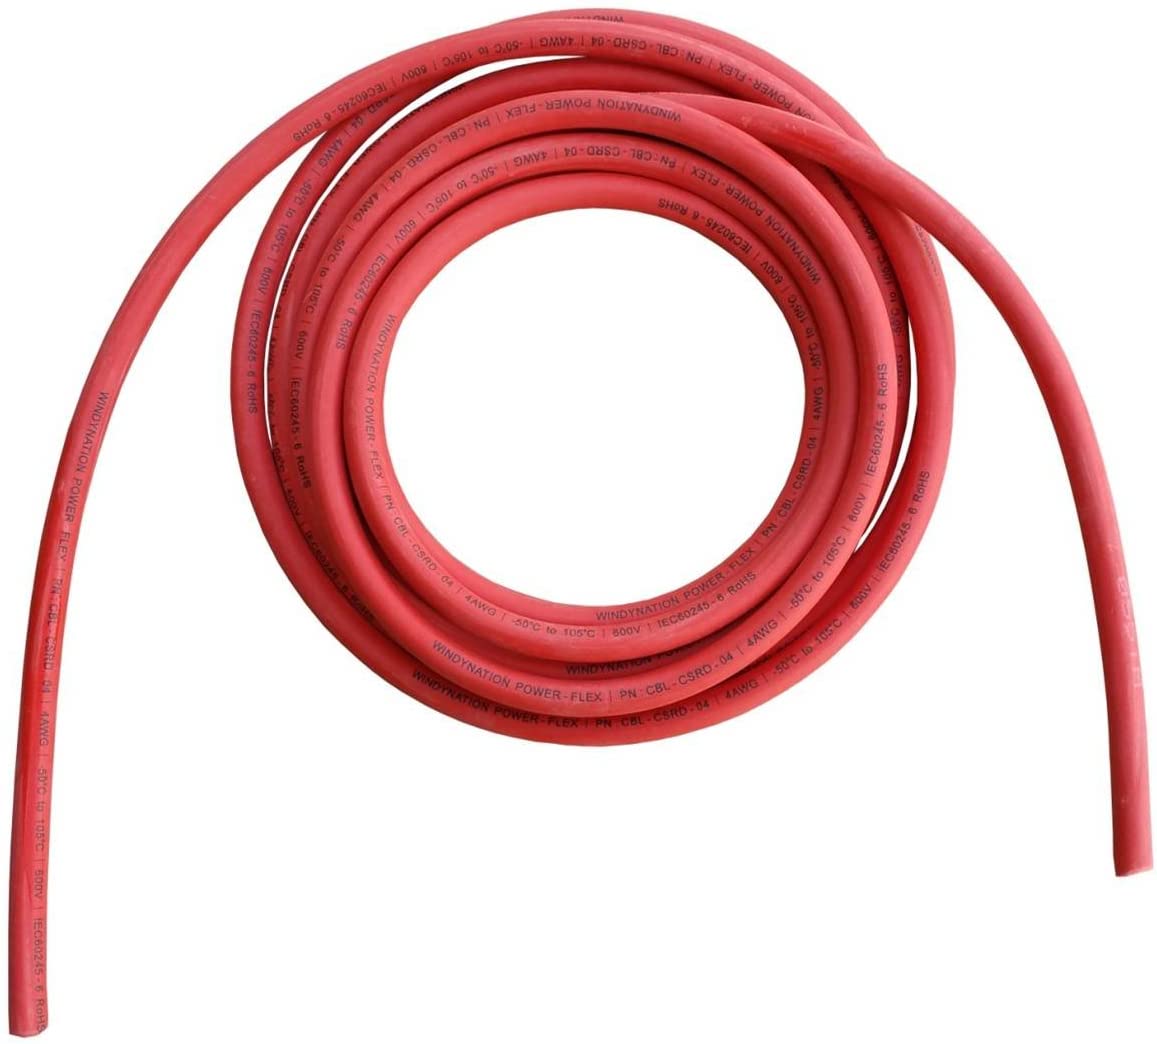 WindyNation Battery Cable